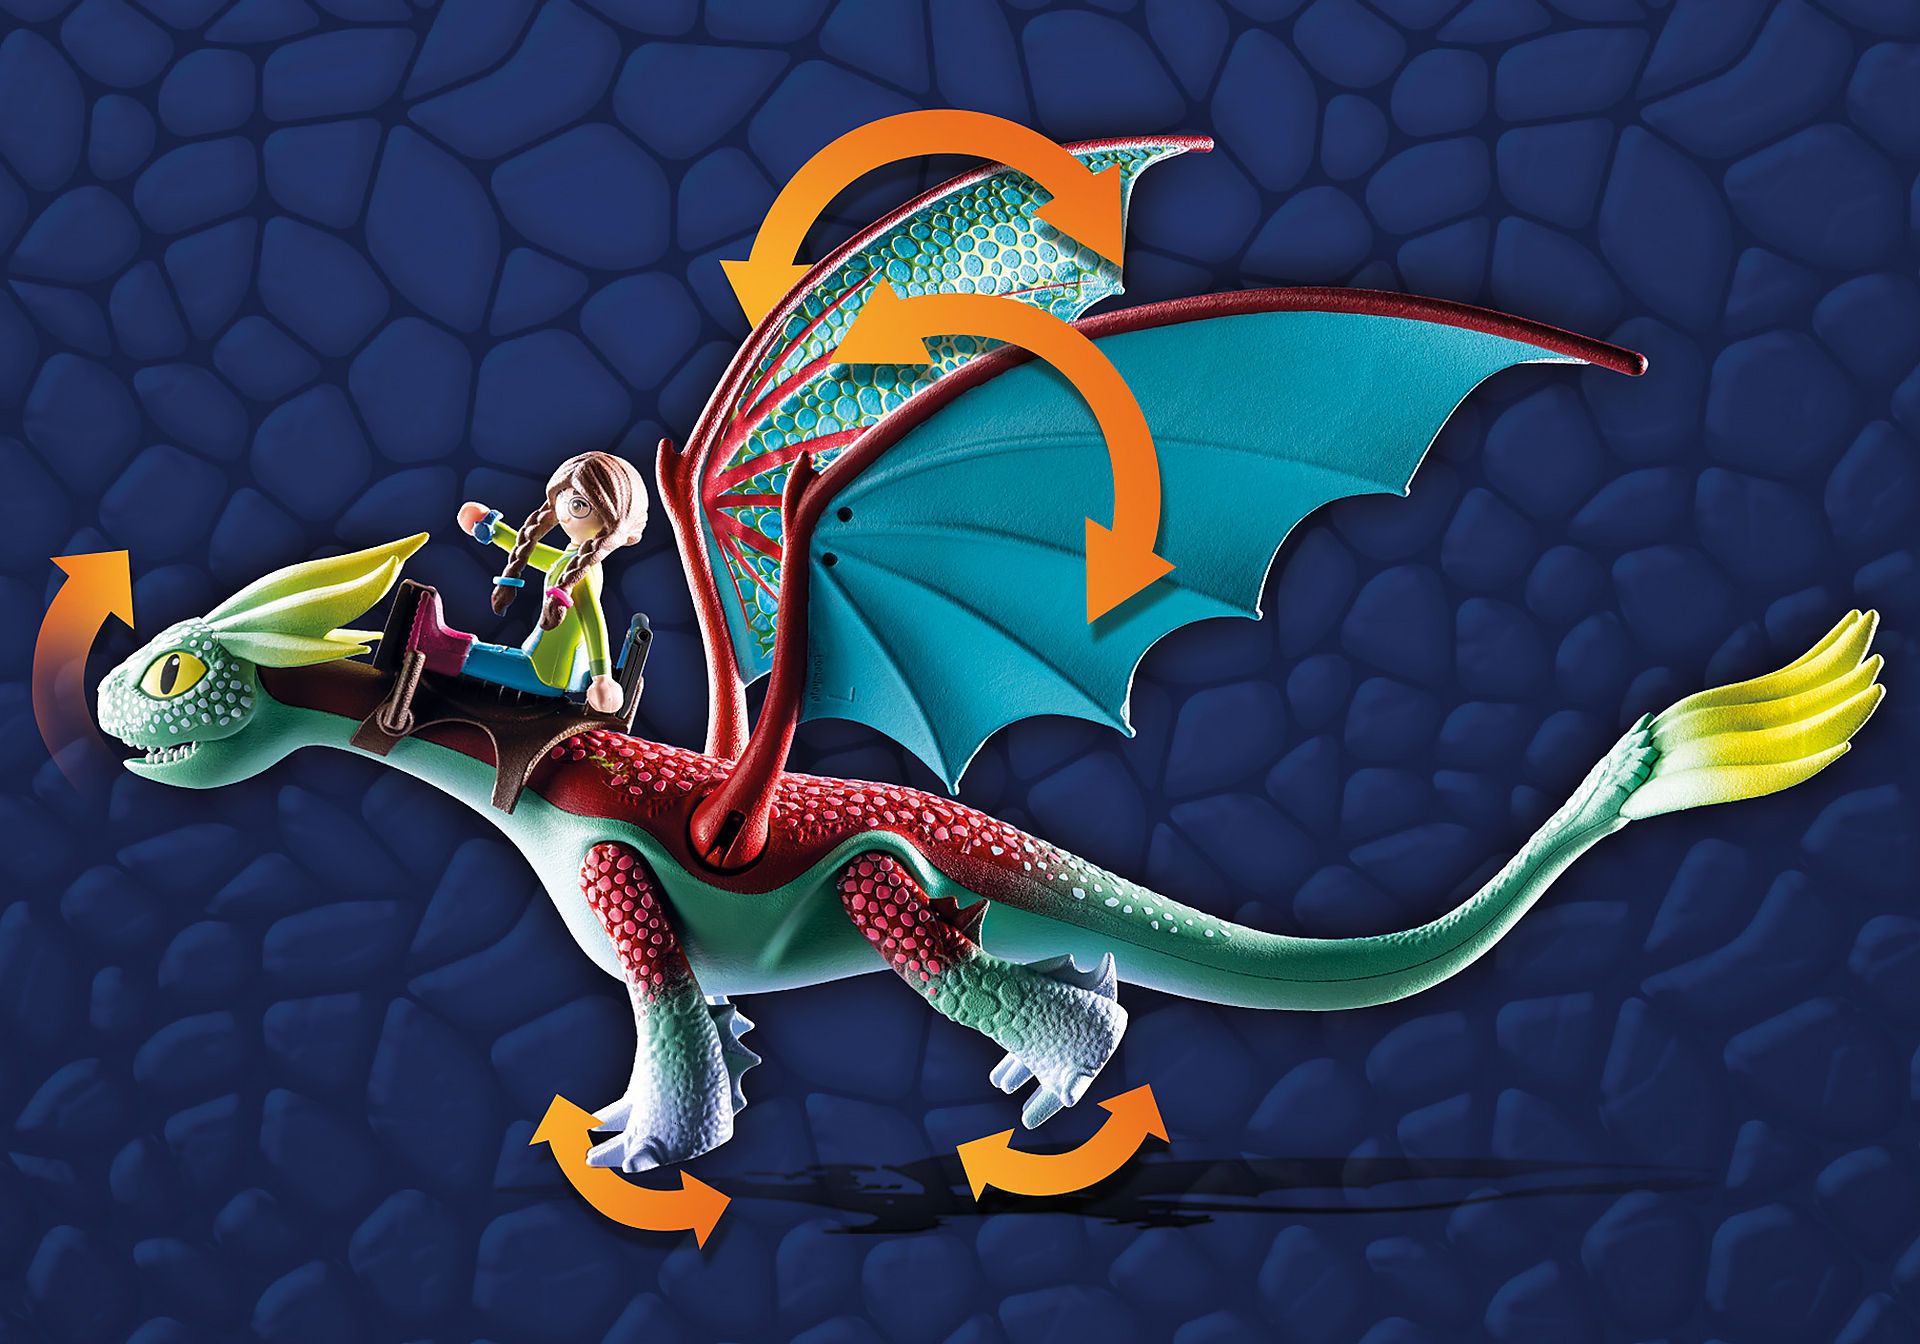 Playmobil Dragons: The Nine Realms Feathers & Alex